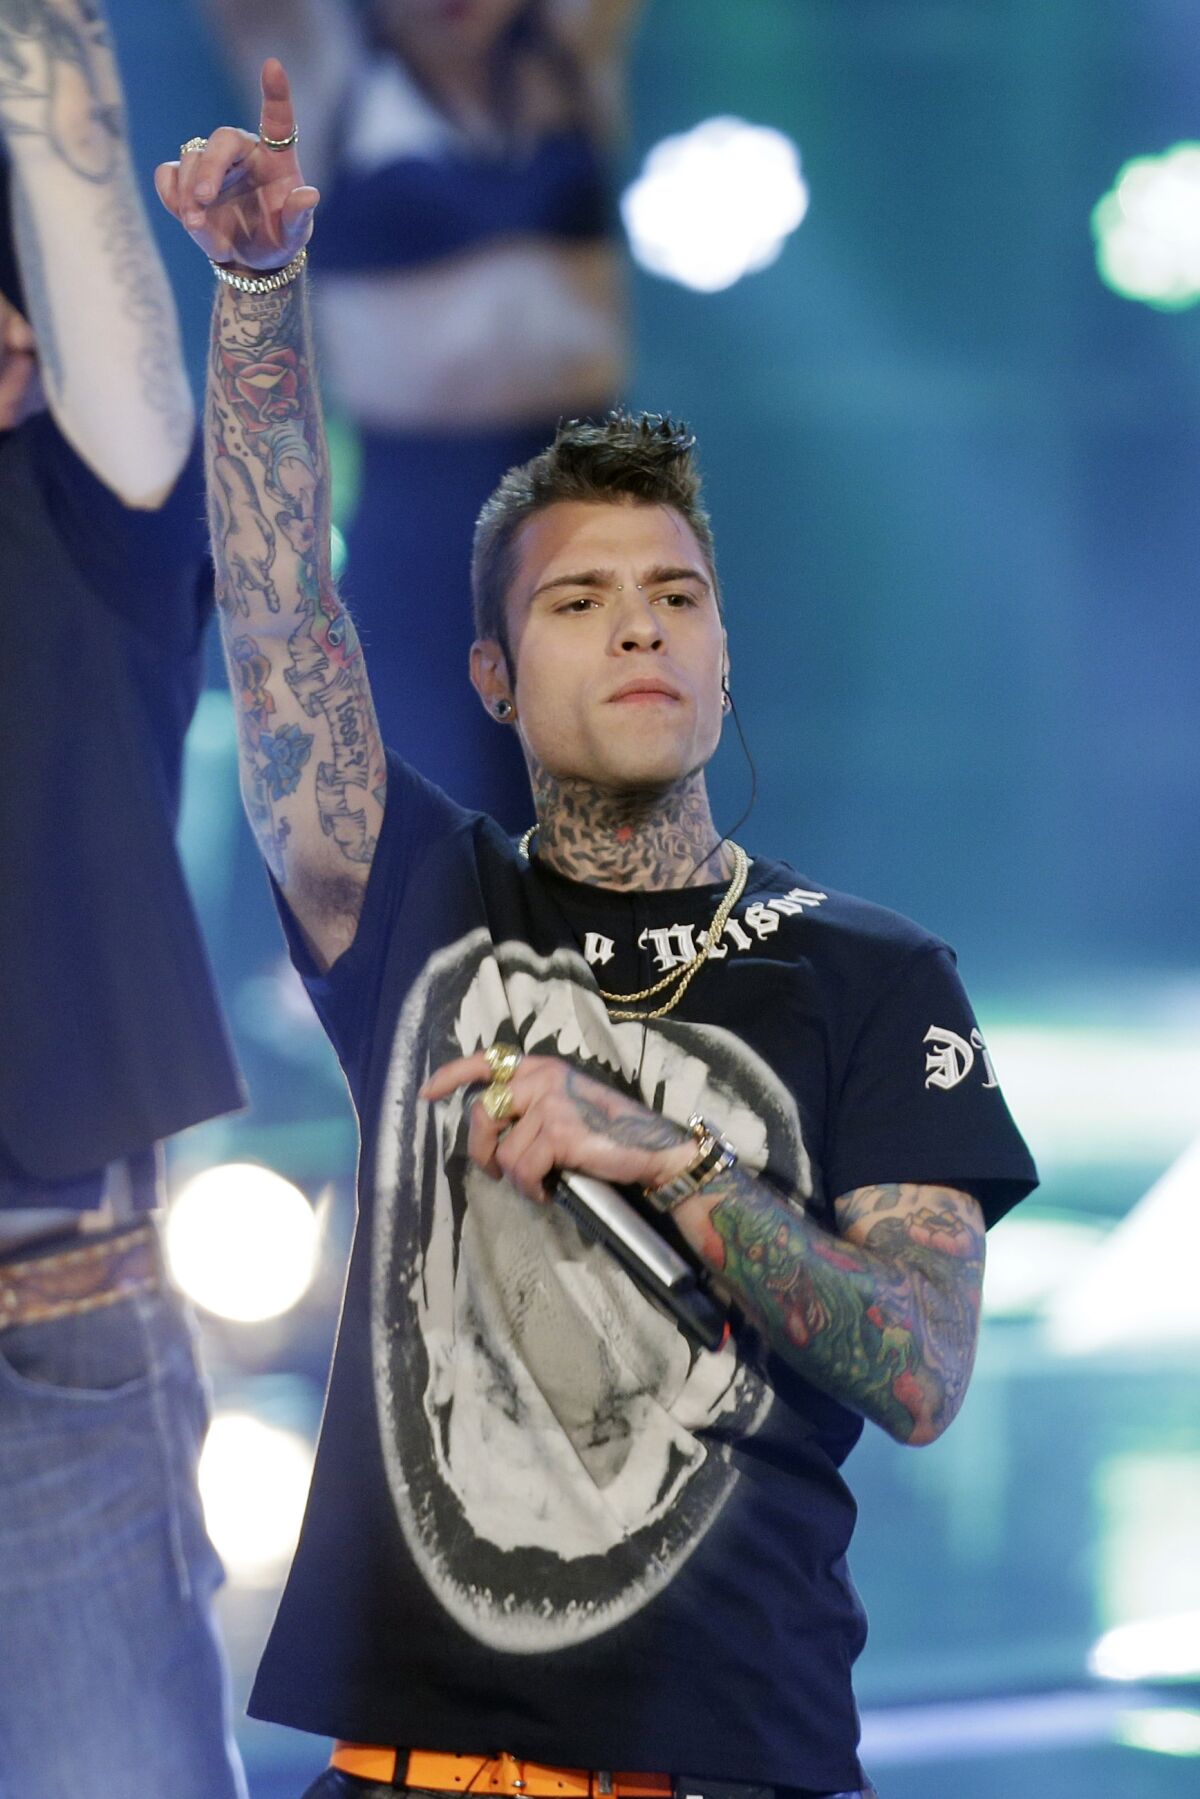 In this photo taken on May 28, 2014, Italian rapper Fedez perform during the Italian State RAI TV program "The Voice of Italy", in Milan, Italy. Italian rapper Fedez received a wave of public support Sunday after going public with attempts by RAI state television to censor planned remarks on homophobia during an annual Worker's Day concert. (AP Photo/Luca Bruno)